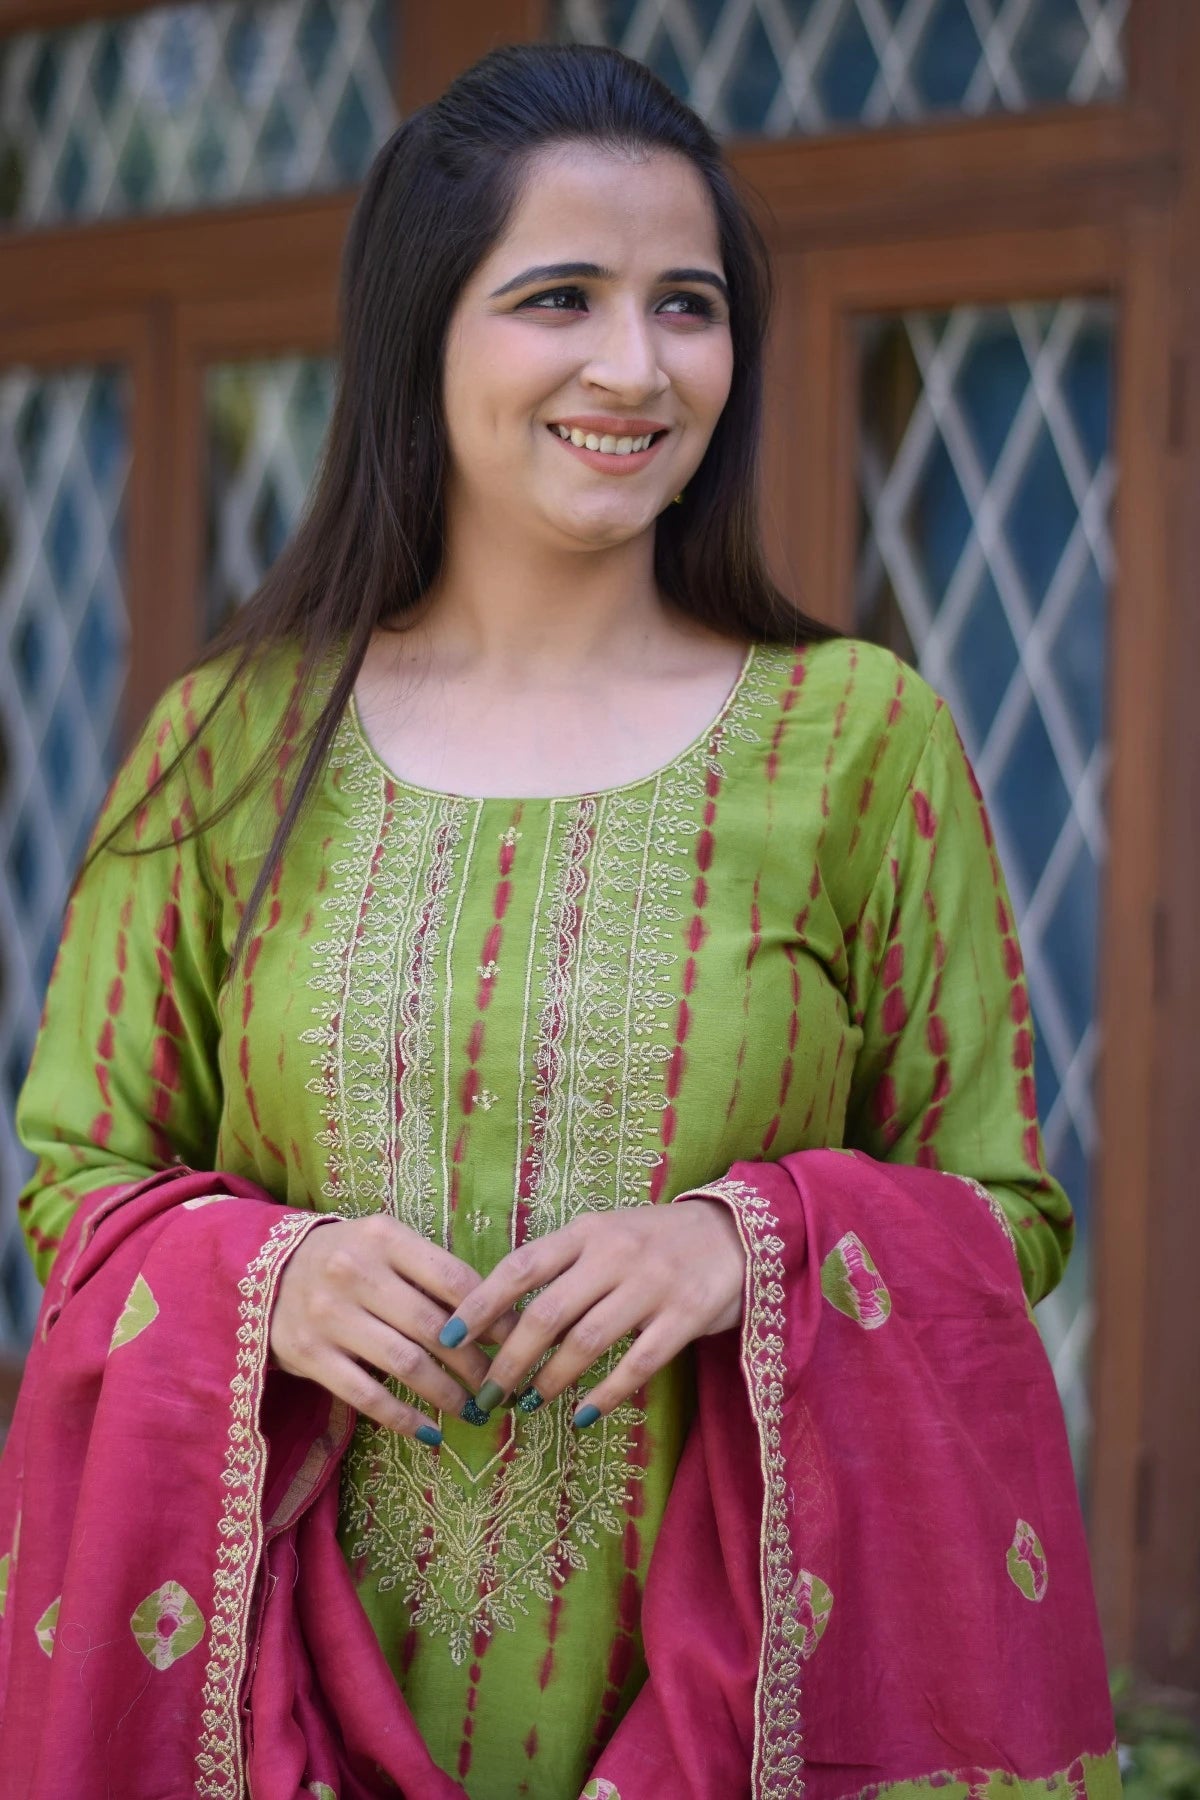 A graceful woman donning a zari hand work suit, the epitome of traditional Indian attire.